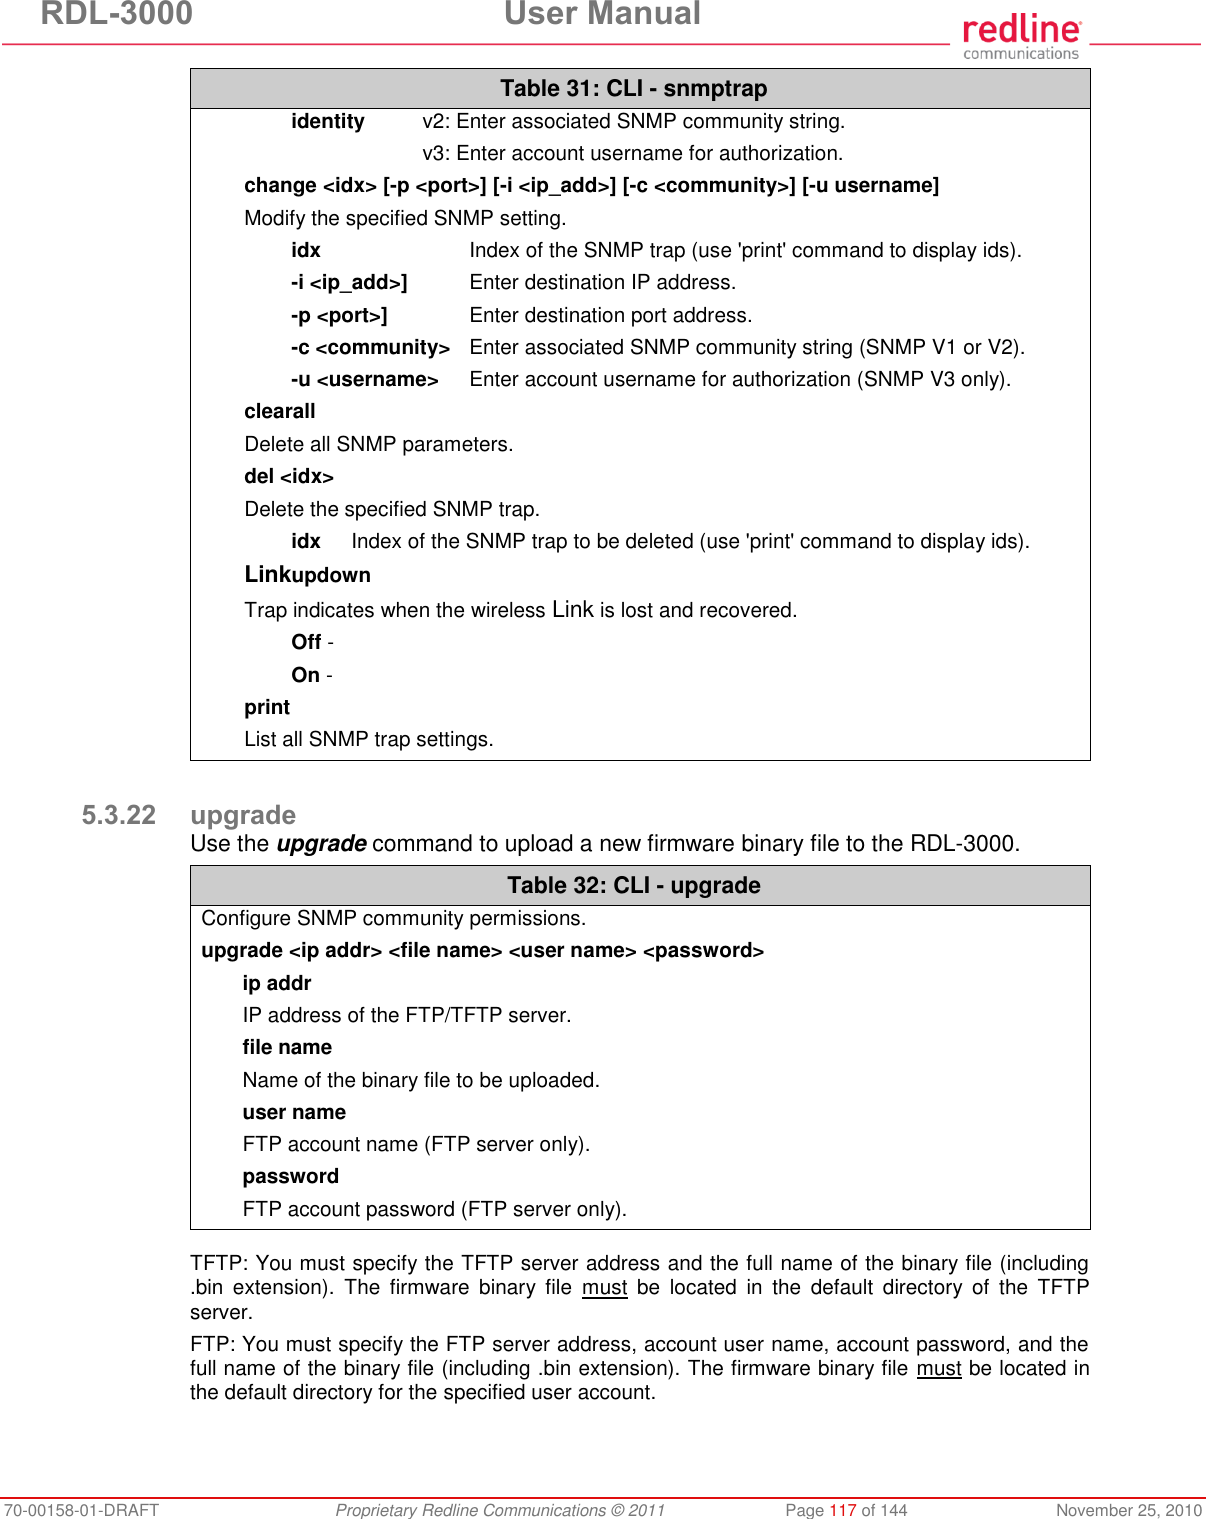 RDL-3000  User Manual 70-00158-01-DRAFT  Proprietary Redline Communications © 2011  Page 117 of 144  November 25, 2010 Table 31: CLI - snmptrap  identity  v2: Enter associated SNMP community string.     v3: Enter account username for authorization. change &lt;idx&gt; [-p &lt;port&gt;] [-i &lt;ip_add&gt;] [-c &lt;community&gt;] [-u username] Modify the specified SNMP setting.  idx  Index of the SNMP trap (use &apos;print&apos; command to display ids).  -i &lt;ip_add&gt;]  Enter destination IP address.  -p &lt;port&gt;]  Enter destination port address.  -c &lt;community&gt;  Enter associated SNMP community string (SNMP V1 or V2).  -u &lt;username&gt;  Enter account username for authorization (SNMP V3 only). clearall Delete all SNMP parameters. del &lt;idx&gt; Delete the specified SNMP trap.   idx  Index of the SNMP trap to be deleted (use &apos;print&apos; command to display ids). Linkupdown Trap indicates when the wireless Link is lost and recovered.  Off -   On -  print List all SNMP trap settings.  5.3.22 upgrade Use the upgrade command to upload a new firmware binary file to the RDL-3000. Table 32: CLI - upgrade Configure SNMP community permissions. upgrade &lt;ip addr&gt; &lt;file name&gt; &lt;user name&gt; &lt;password&gt; ip addr   IP address of the FTP/TFTP server. file name   Name of the binary file to be uploaded. user name   FTP account name (FTP server only). password   FTP account password (FTP server only).   TFTP: You must specify the TFTP server address and the full name of the binary file (including .bin  extension).  The  firmware  binary  file  must  be  located  in  the  default  directory  of  the  TFTP server. FTP: You must specify the FTP server address, account user name, account password, and the full name of the binary file (including .bin extension). The firmware binary file must be located in the default directory for the specified user account.  